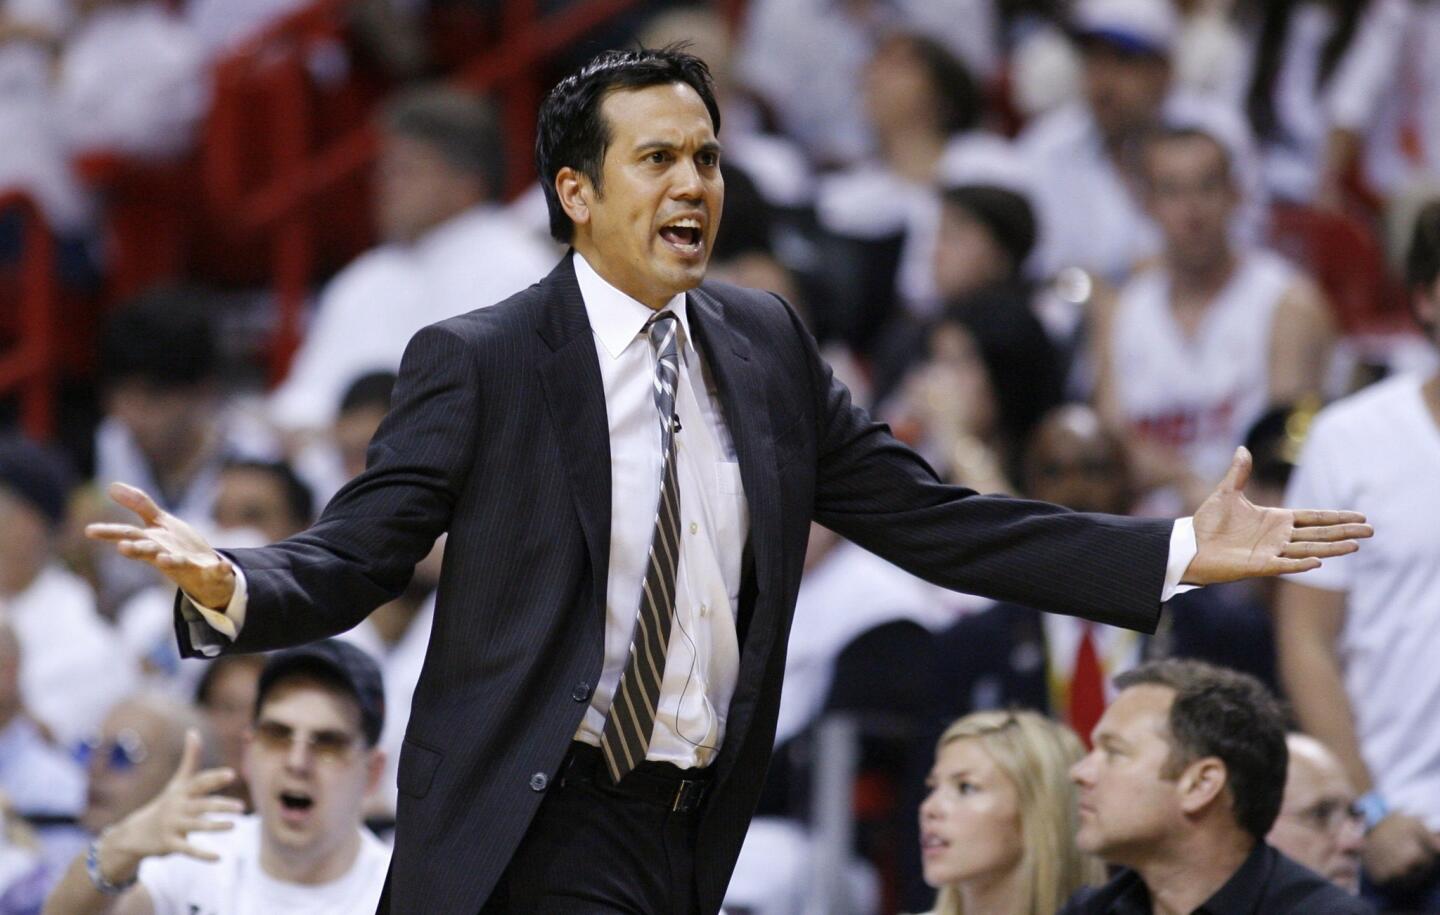 Miami Heat coach Spoelstra reacts as they play Indiana Pacers during Game 2 of their NBA Eastern Conference playoff in Miami